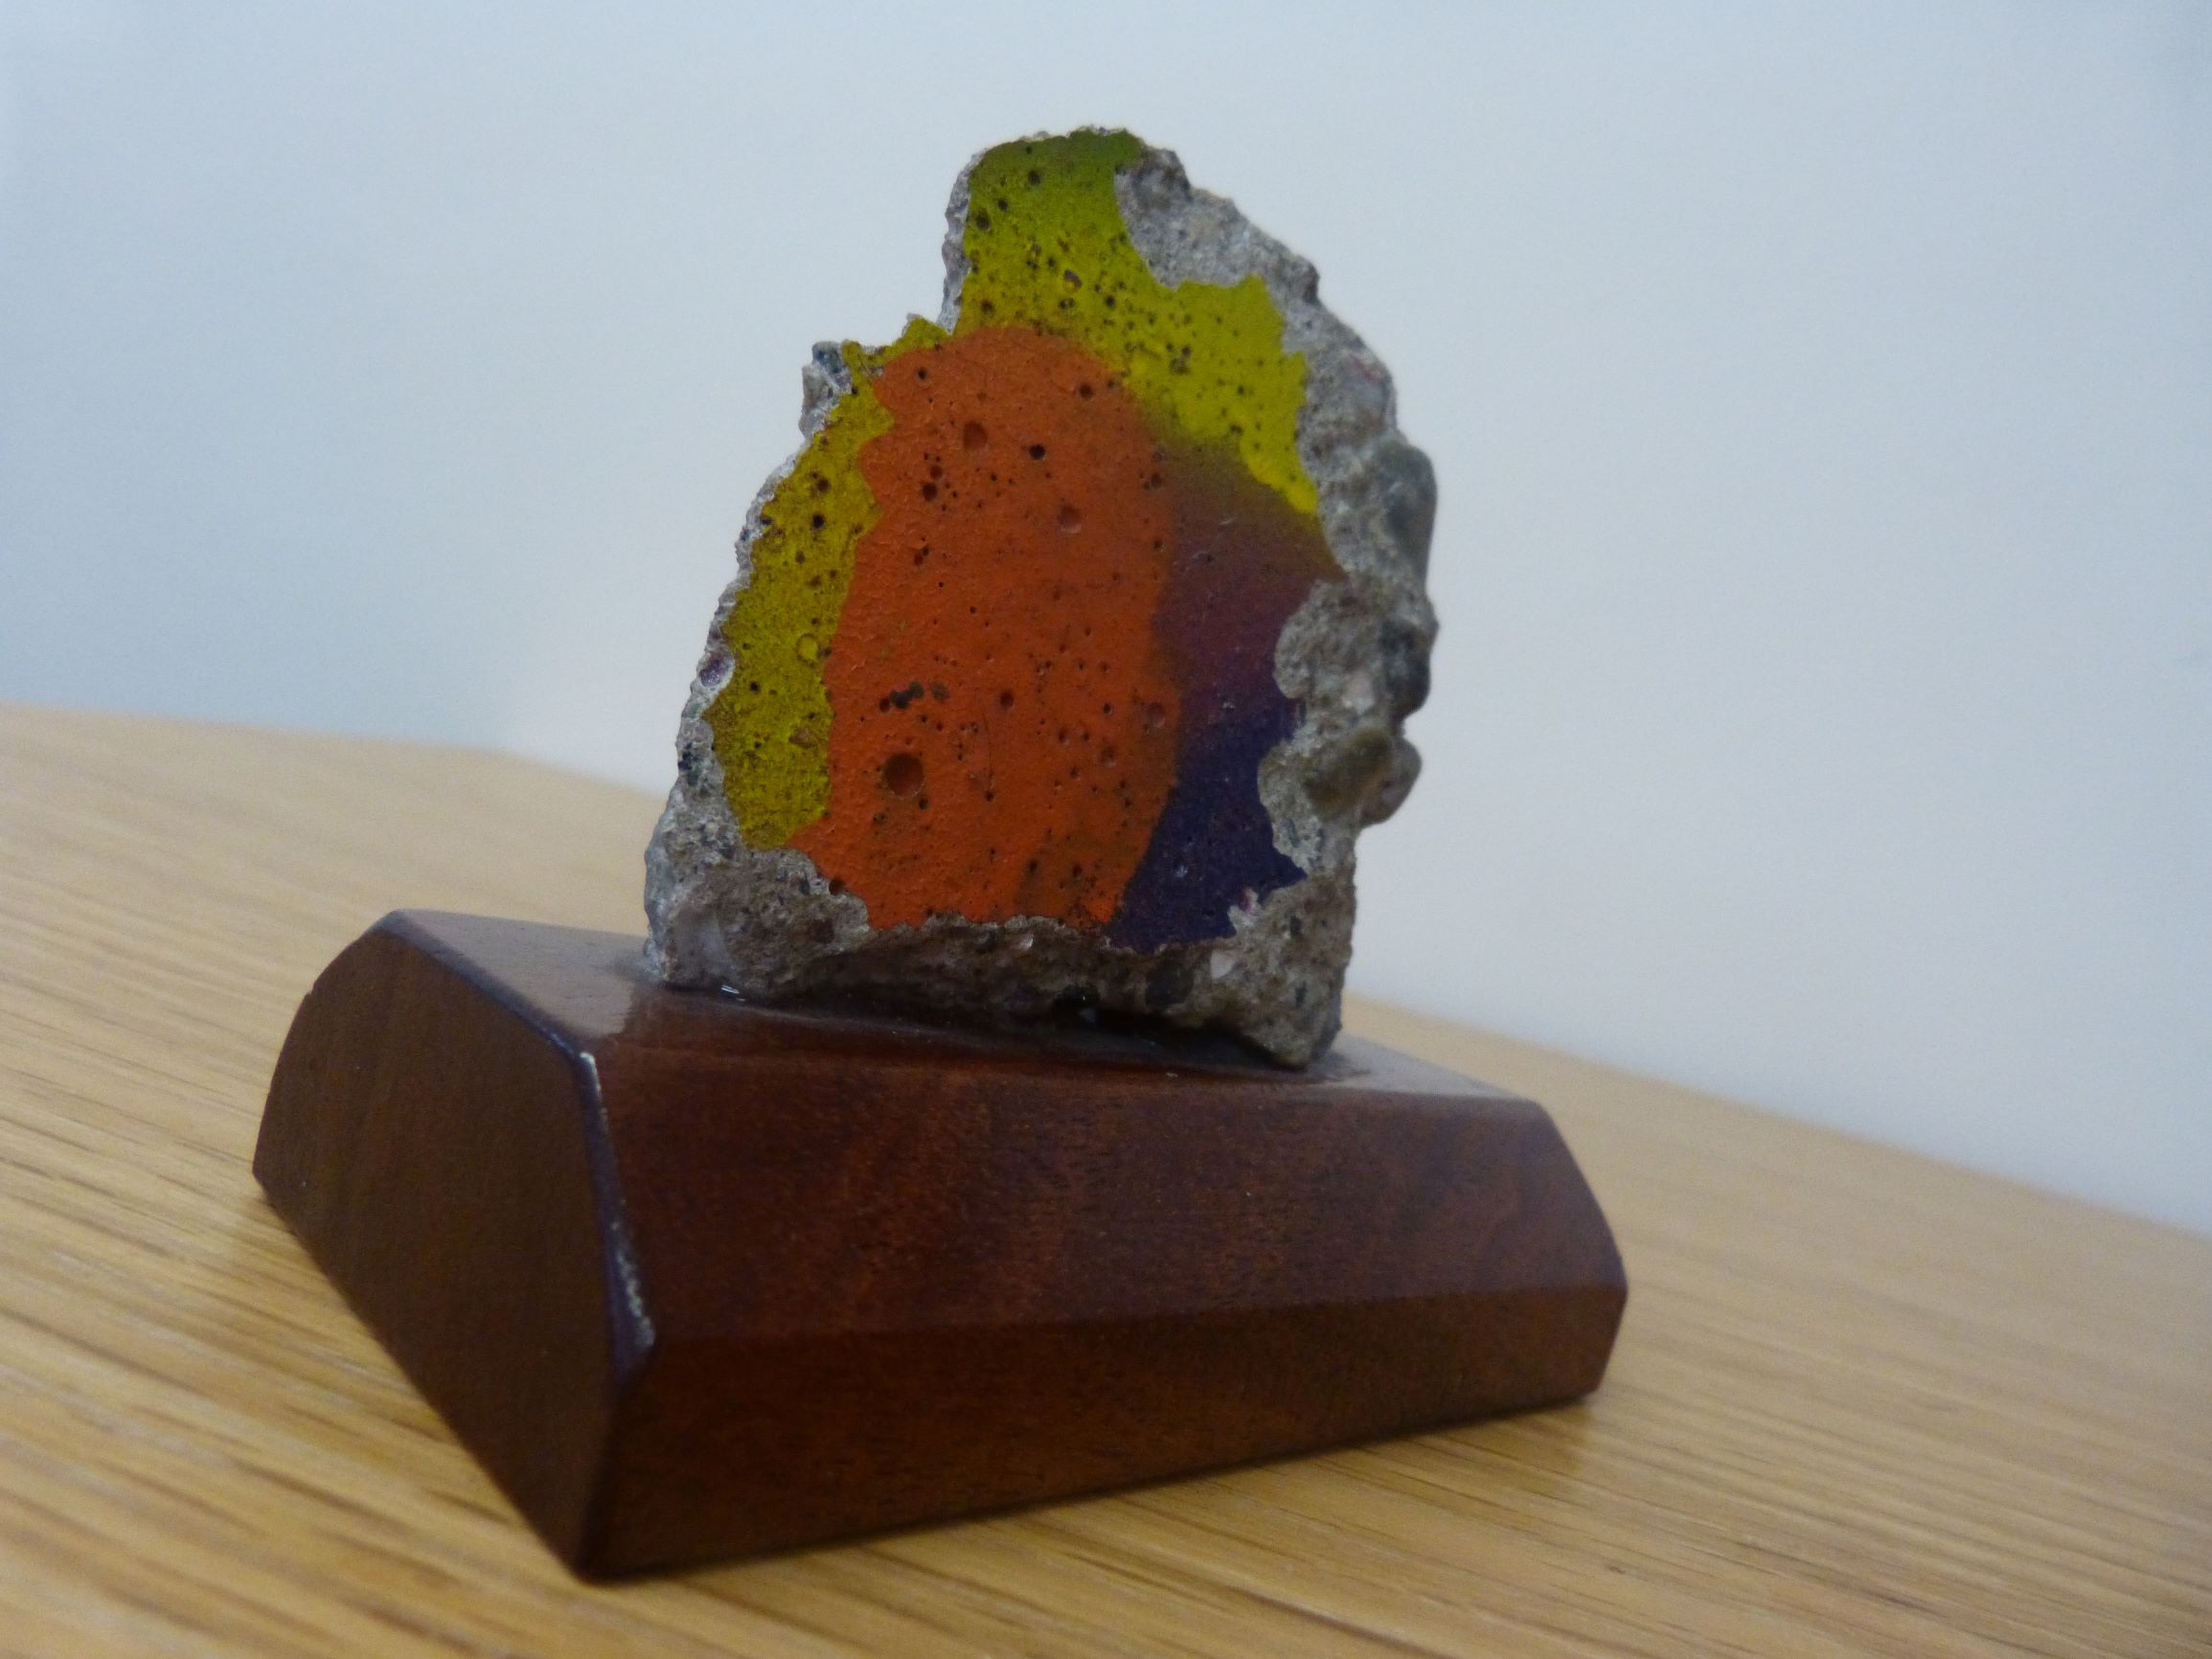 A piece of the Berlin Wall given to Wrexham